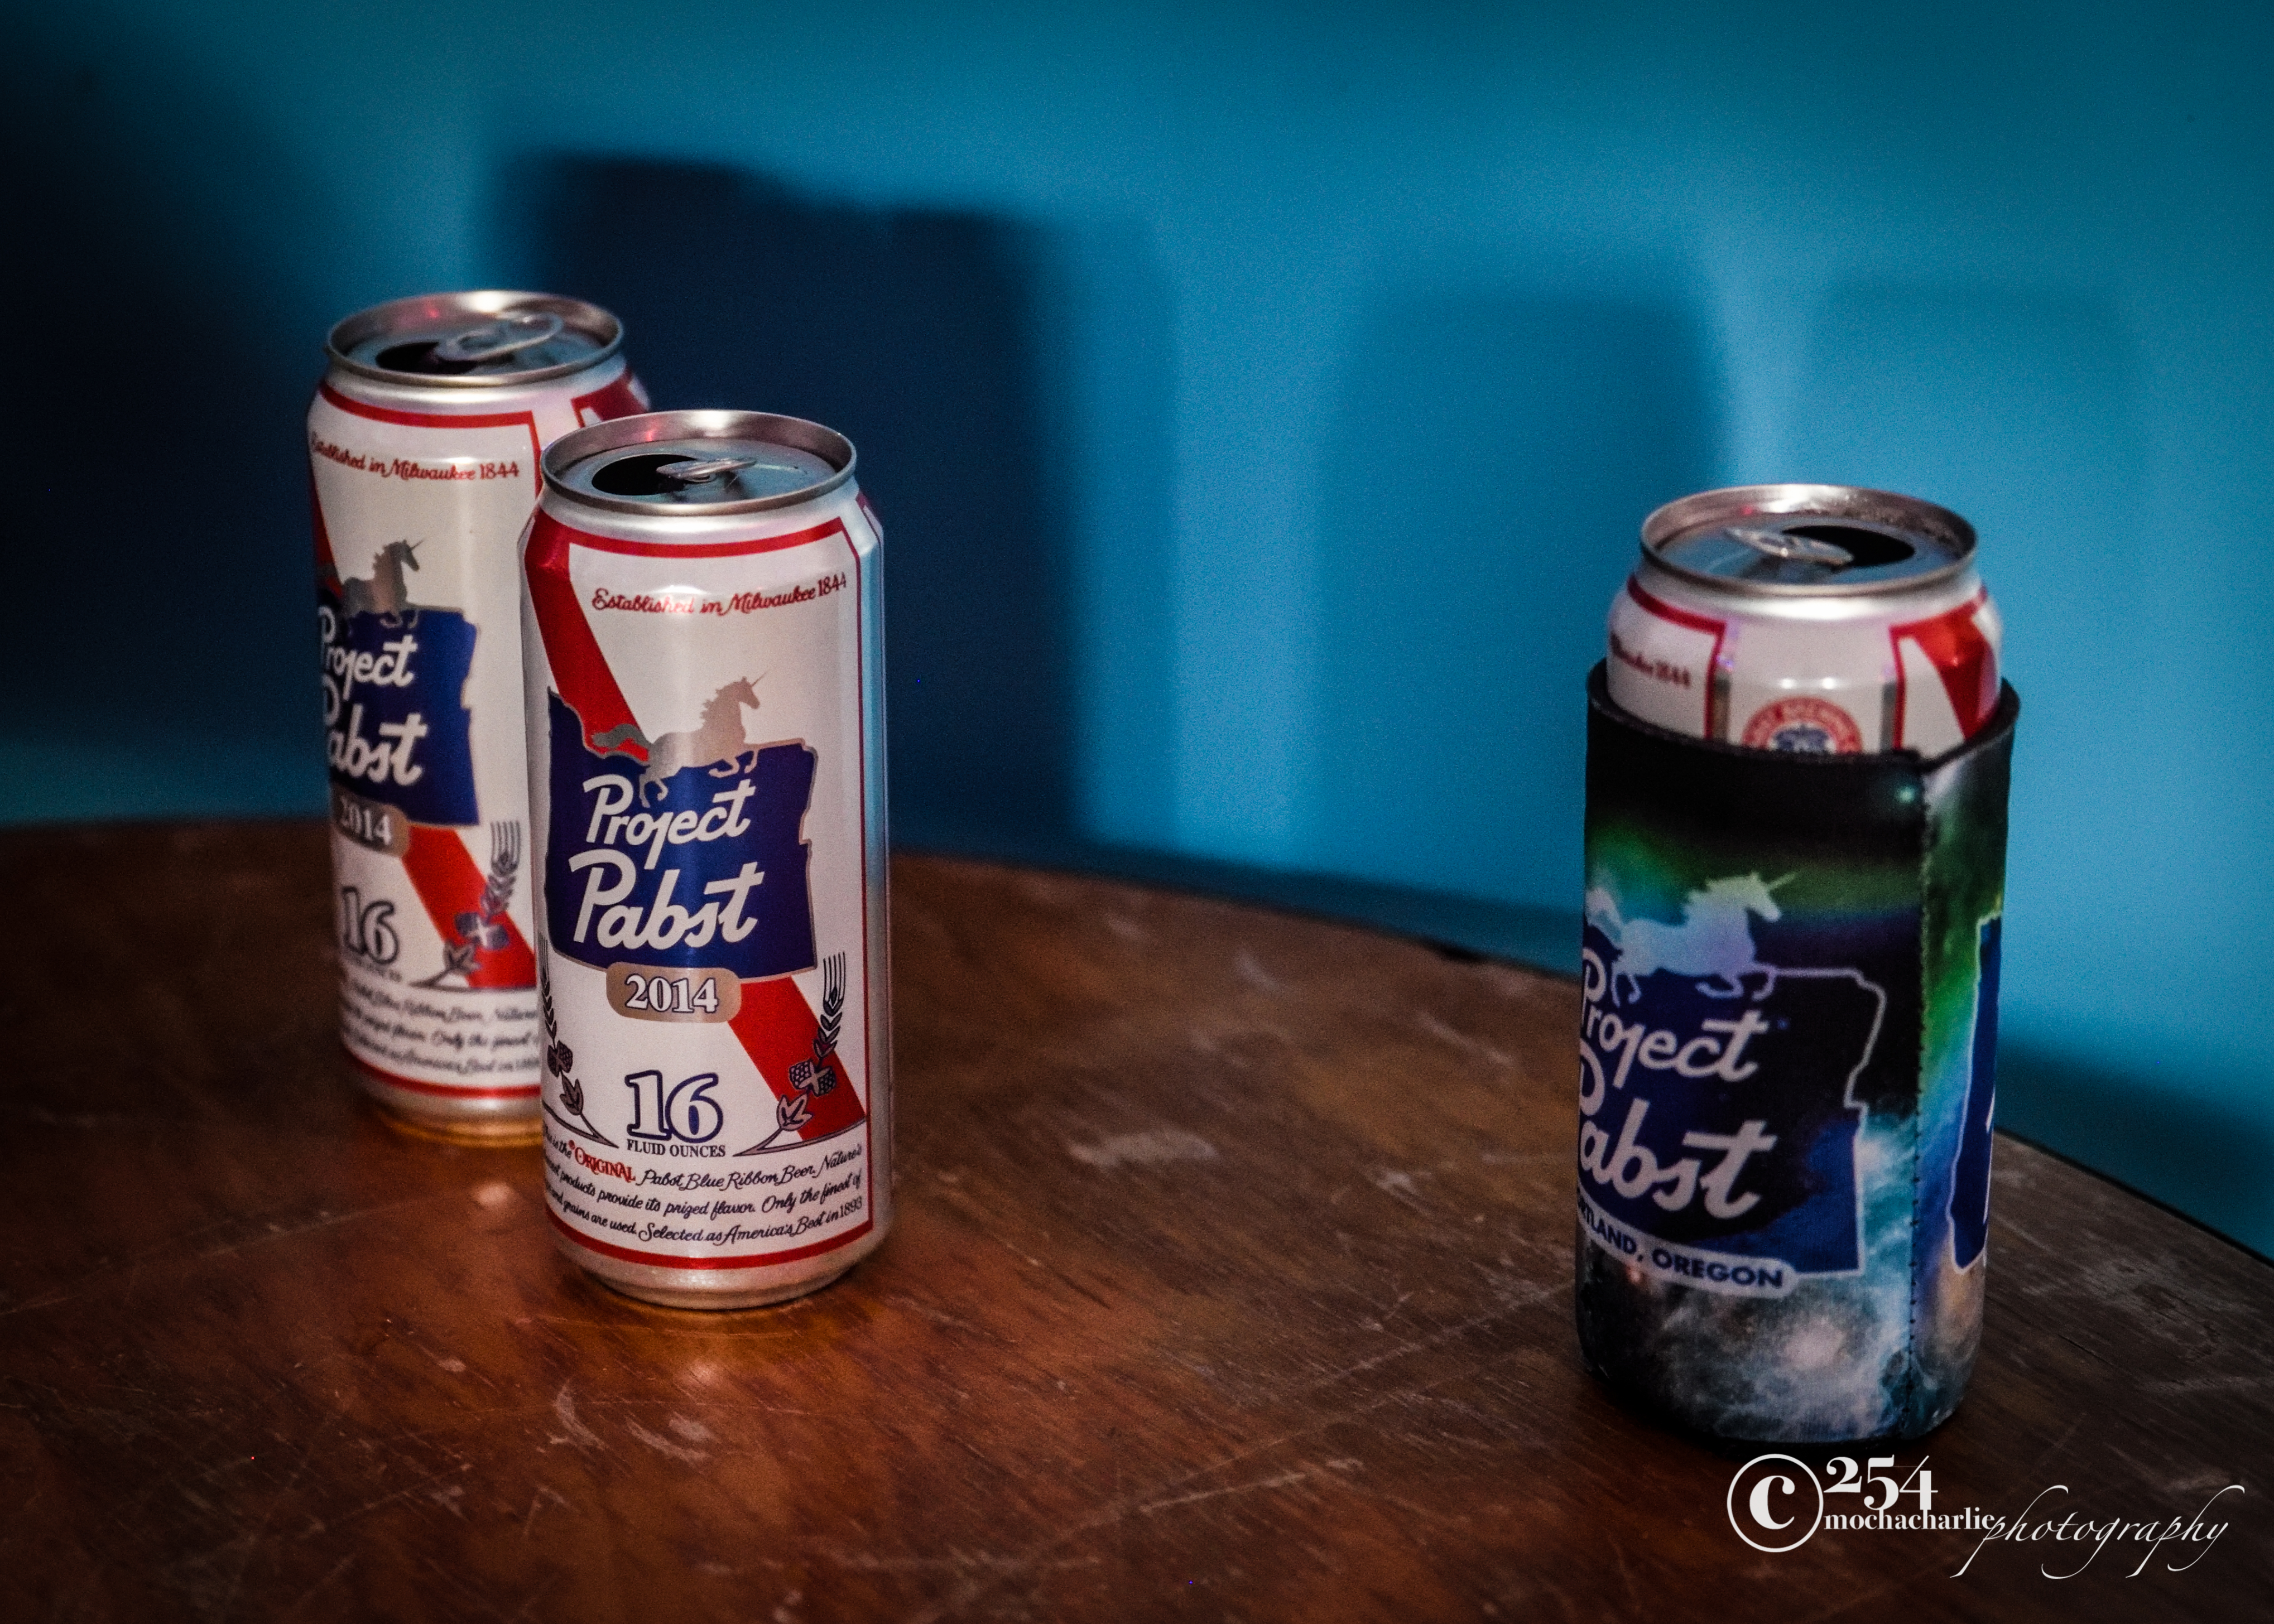 Project Pabst (Photo by Mocha Charlie)